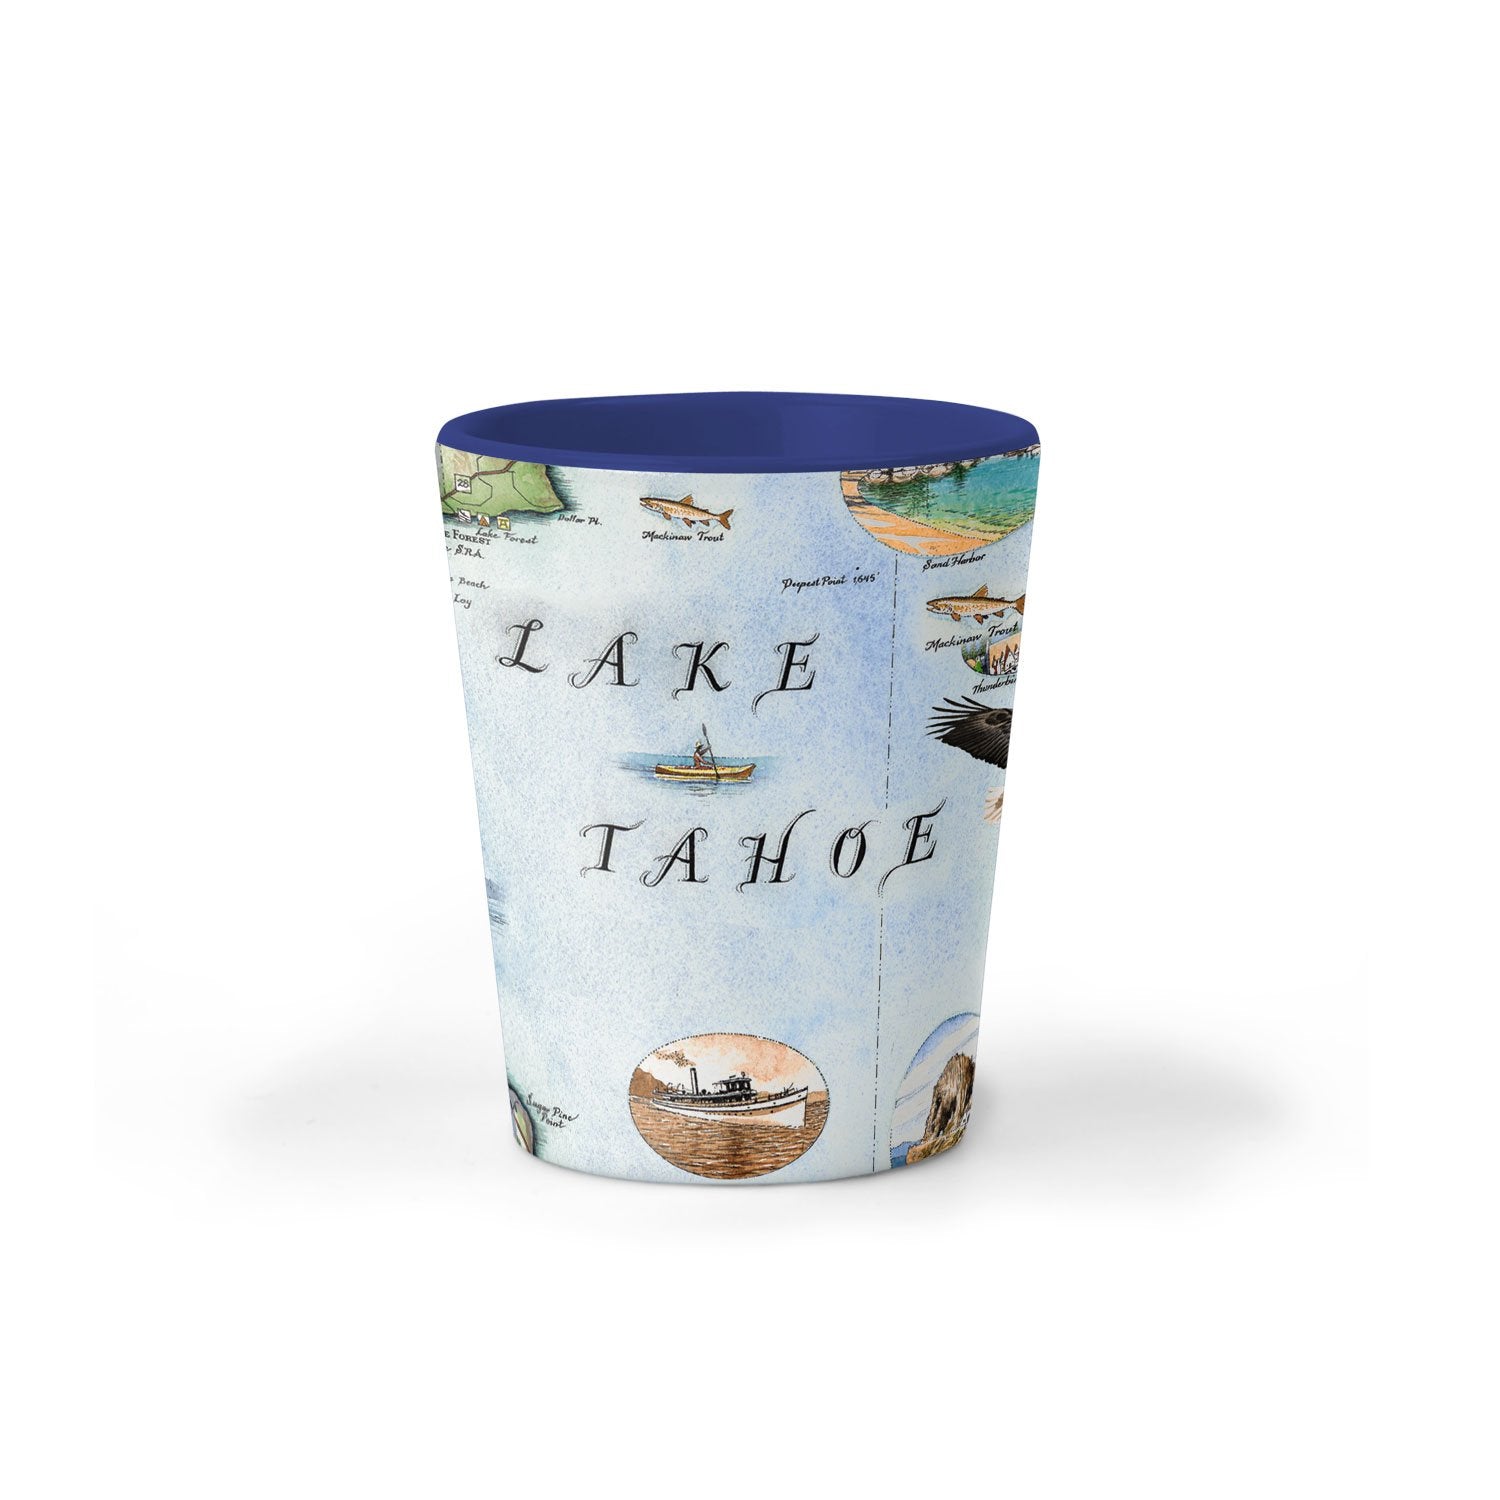 Lake Tahoe Map Ceramic shot glass by Xplorer Maps. The map features the land's topography along with the area's flora and fauna, such as Emerald Bay, Cove Rock, Thunderbird Lodge, and Cal Neva Lodge & Resort. A hand-illustrated black bear with cubs is in the bottom right corner. 